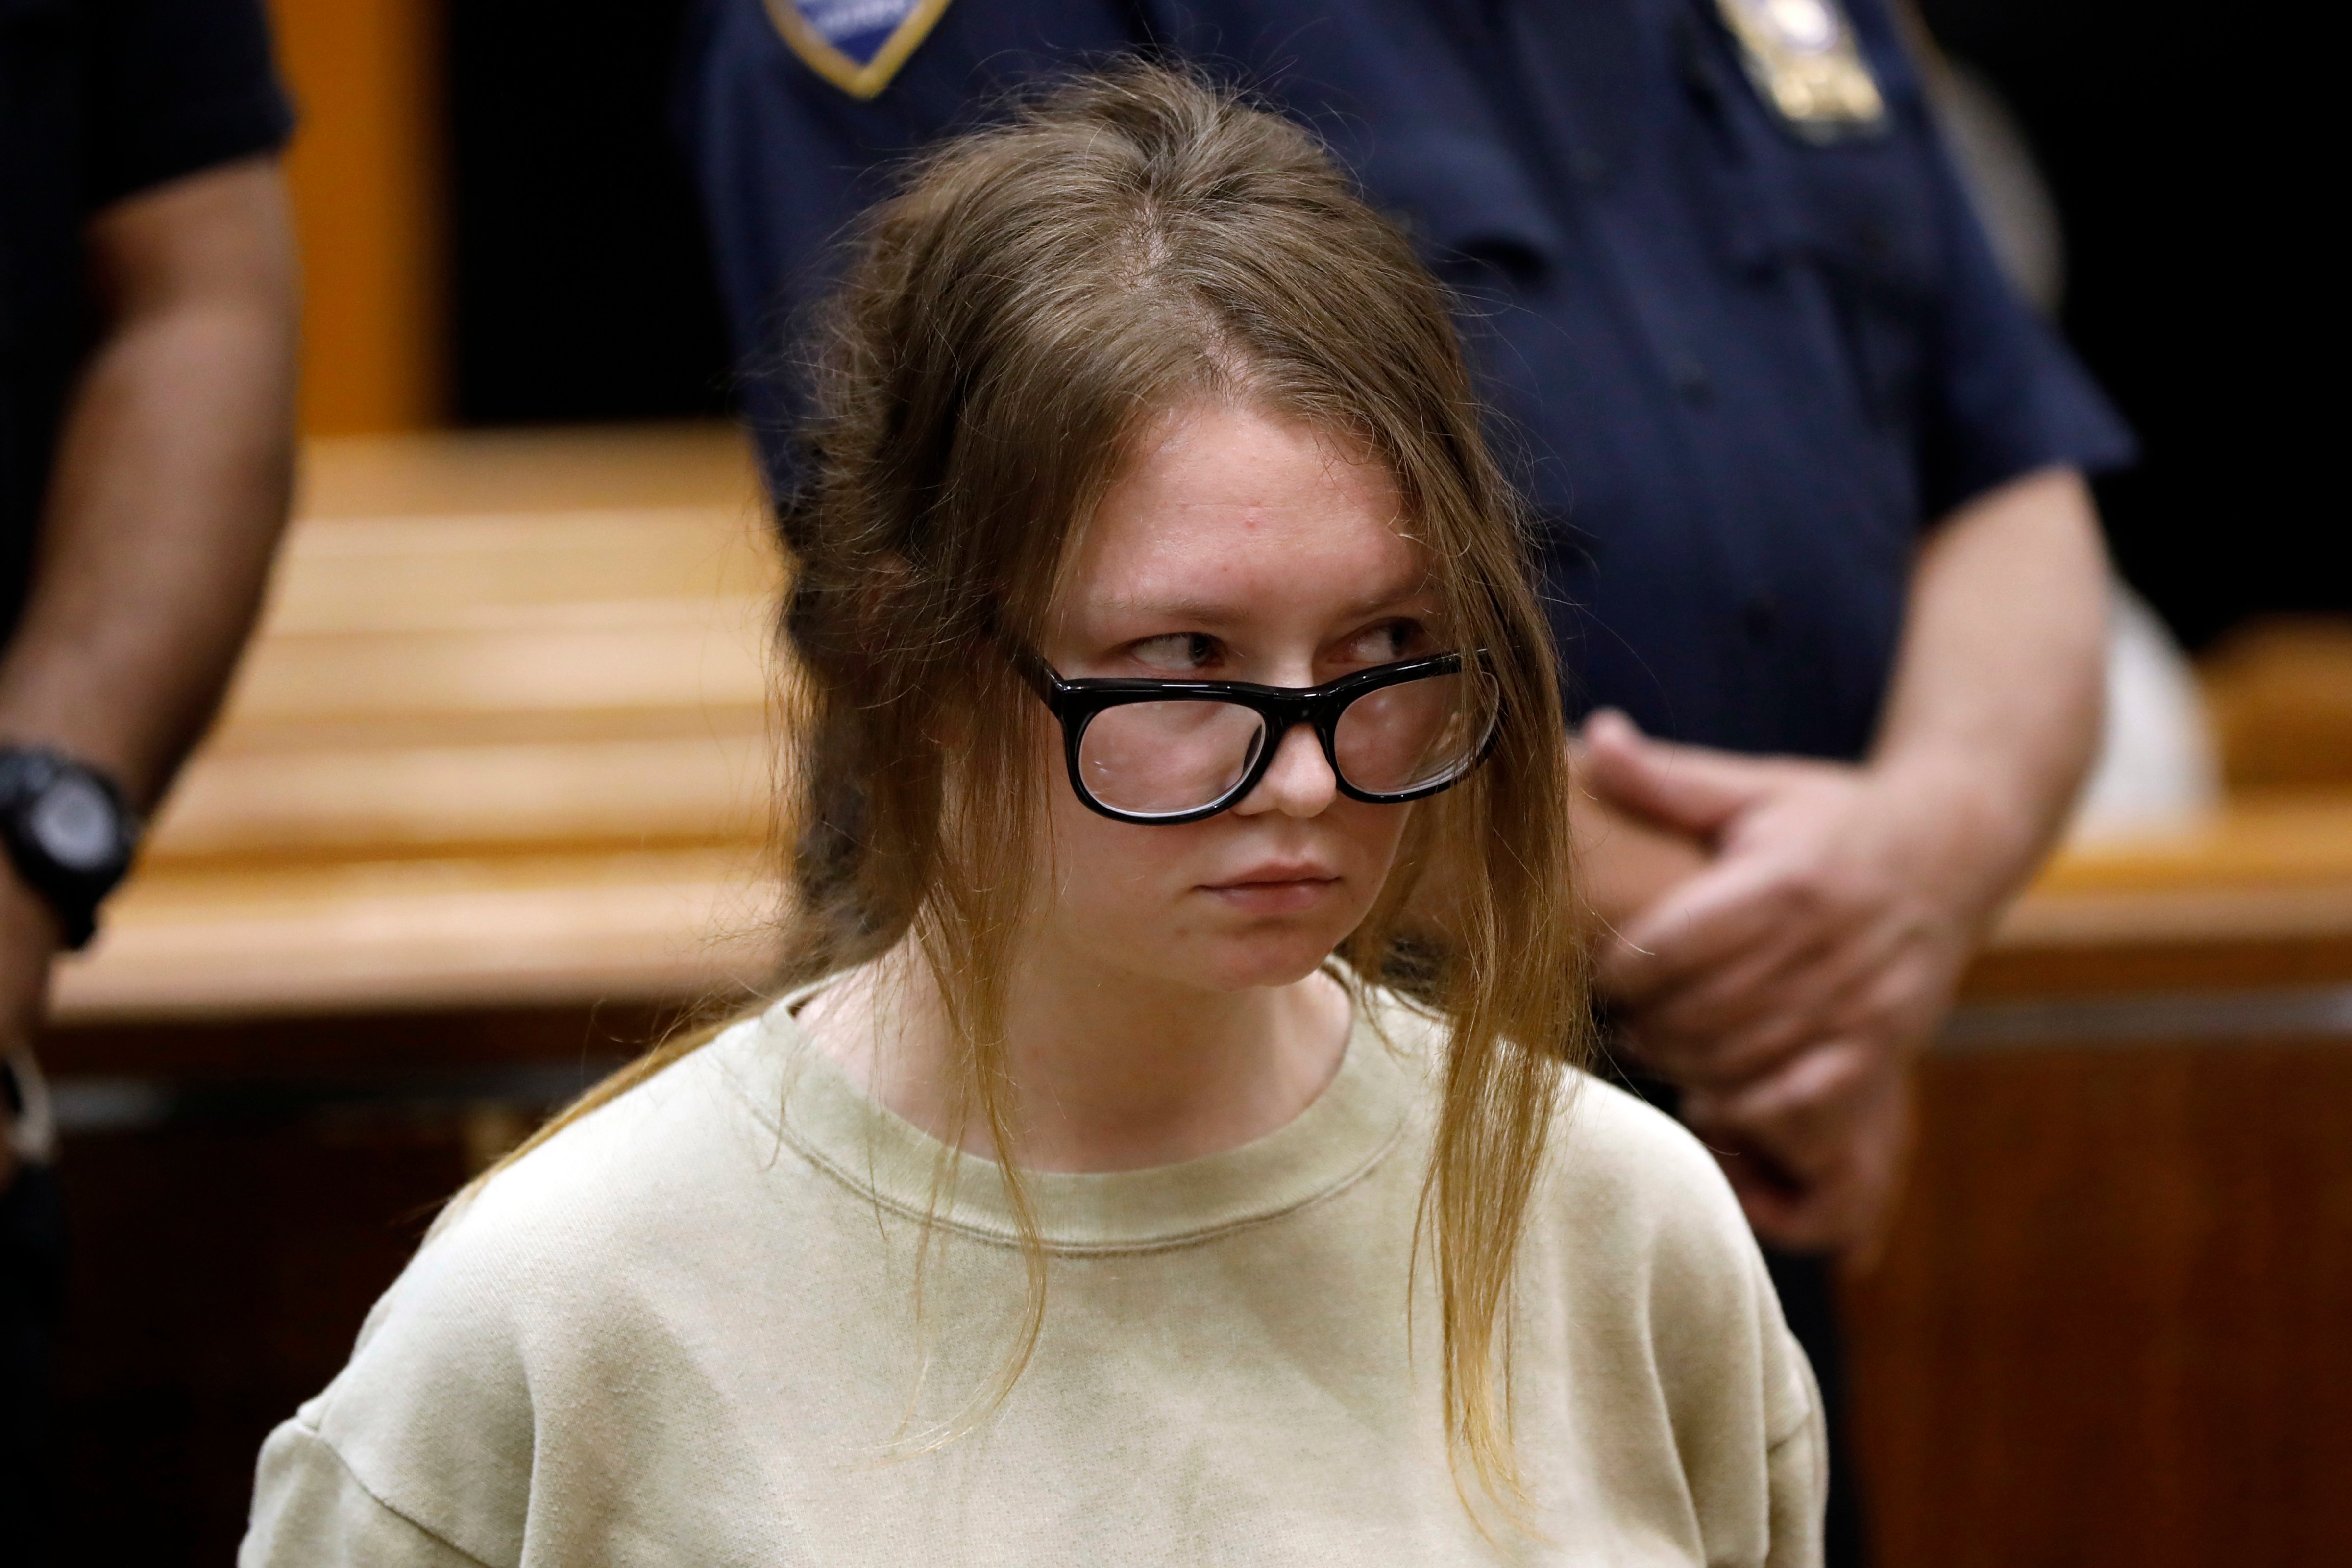 Anna Sorokin appears in New York State Supreme Court on grand larceny charges on Oct. 30, 2018. On March 27, 2019, Sorokin, the onetime darling of the Big Apple social scene known as Anna Delvey, is scheduled to stand trial on grand larceny and theft of services charges alleging she swindled $275,000 in a 10-month odyssey that saw her jetting to Omaha and Marrakesh. (Richard Drew—AP)